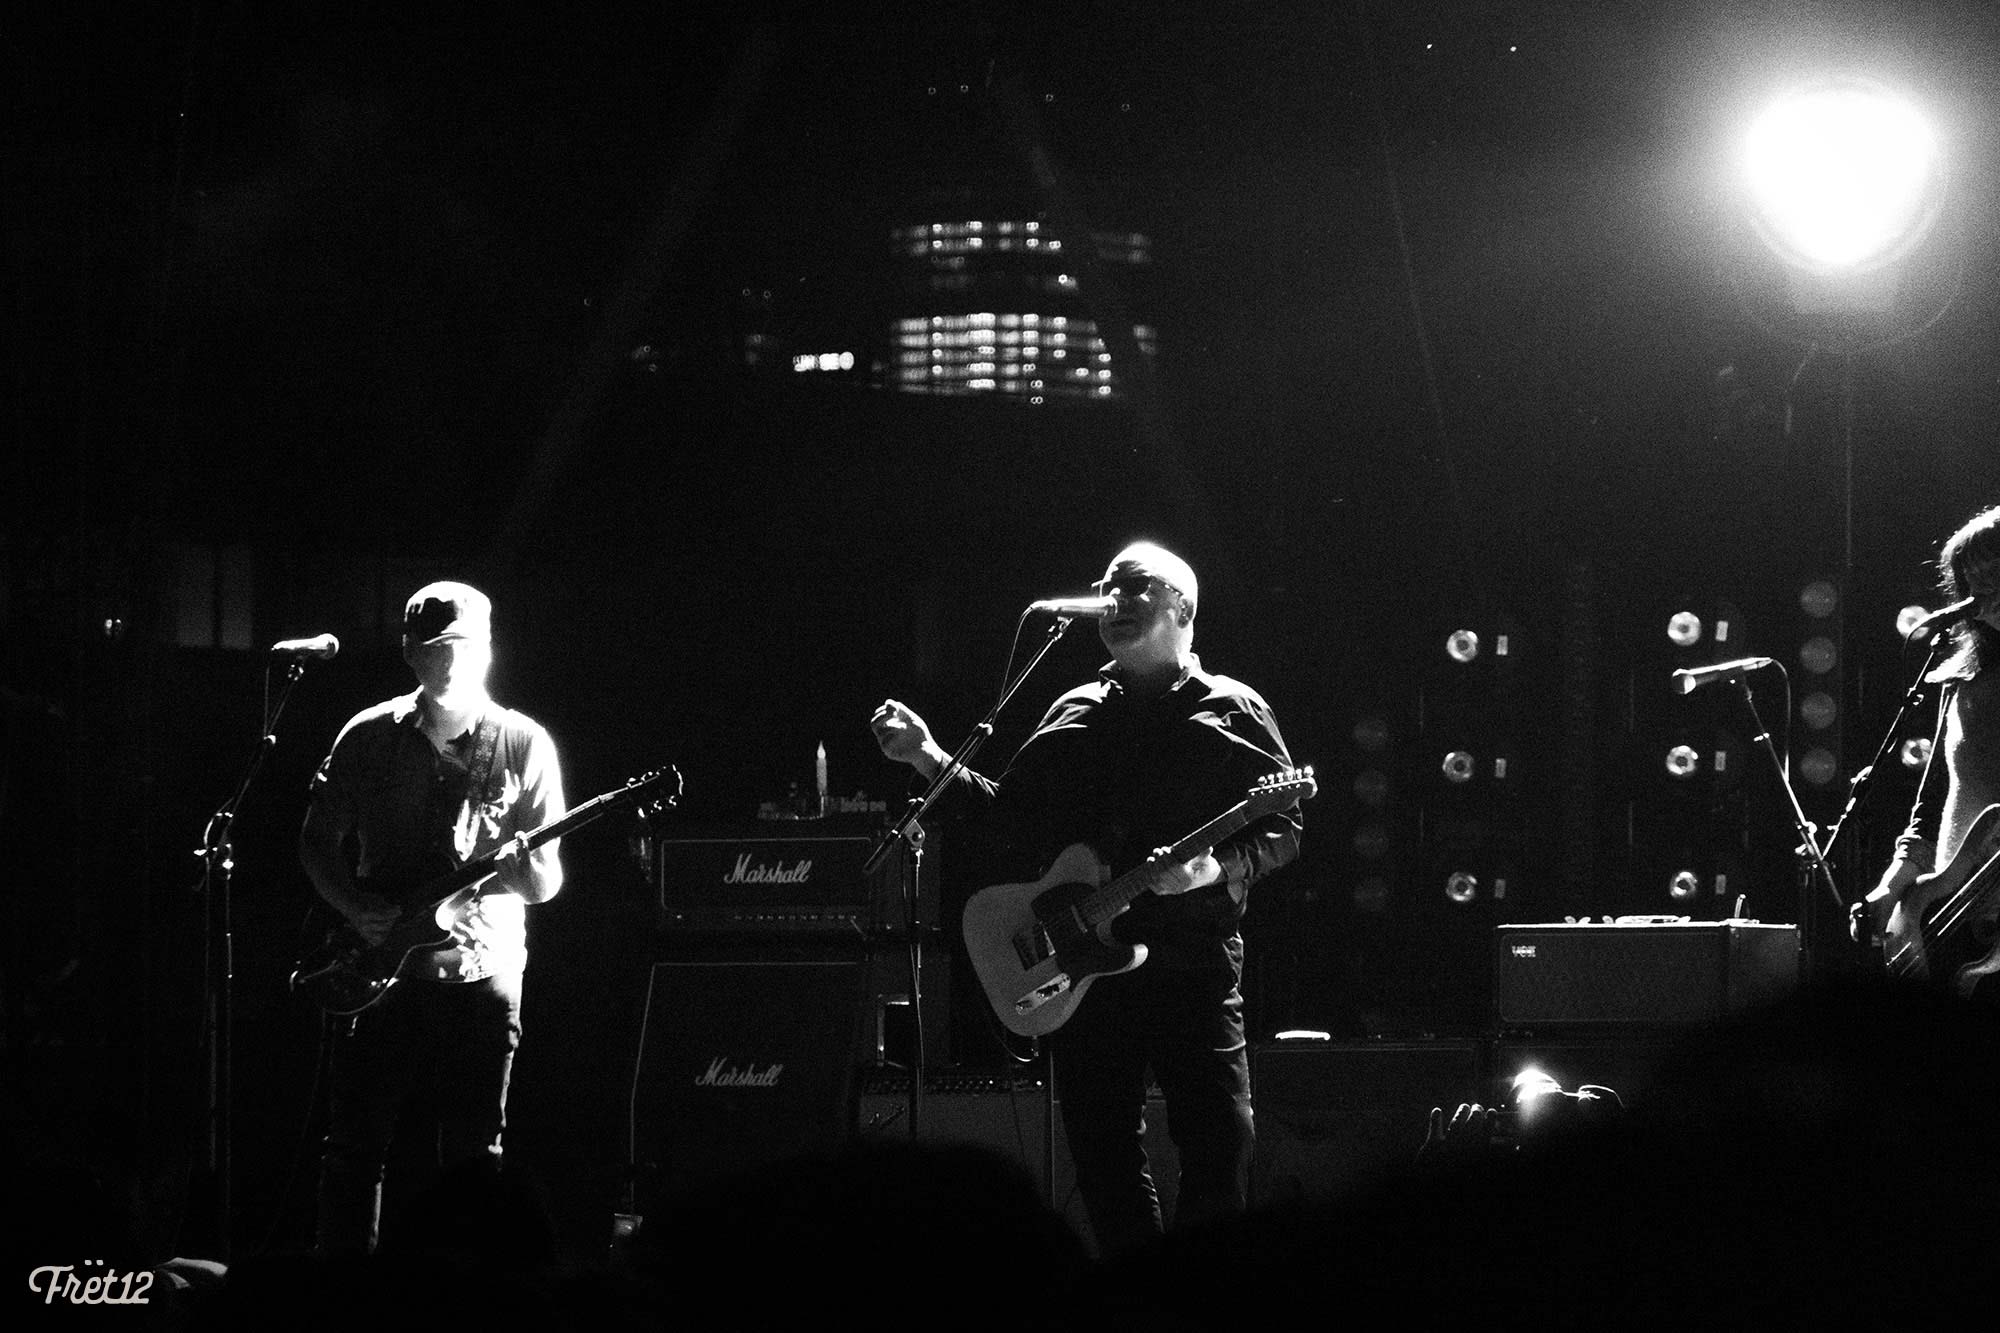 Pixies at The Salt Shed - Photos by FRET12